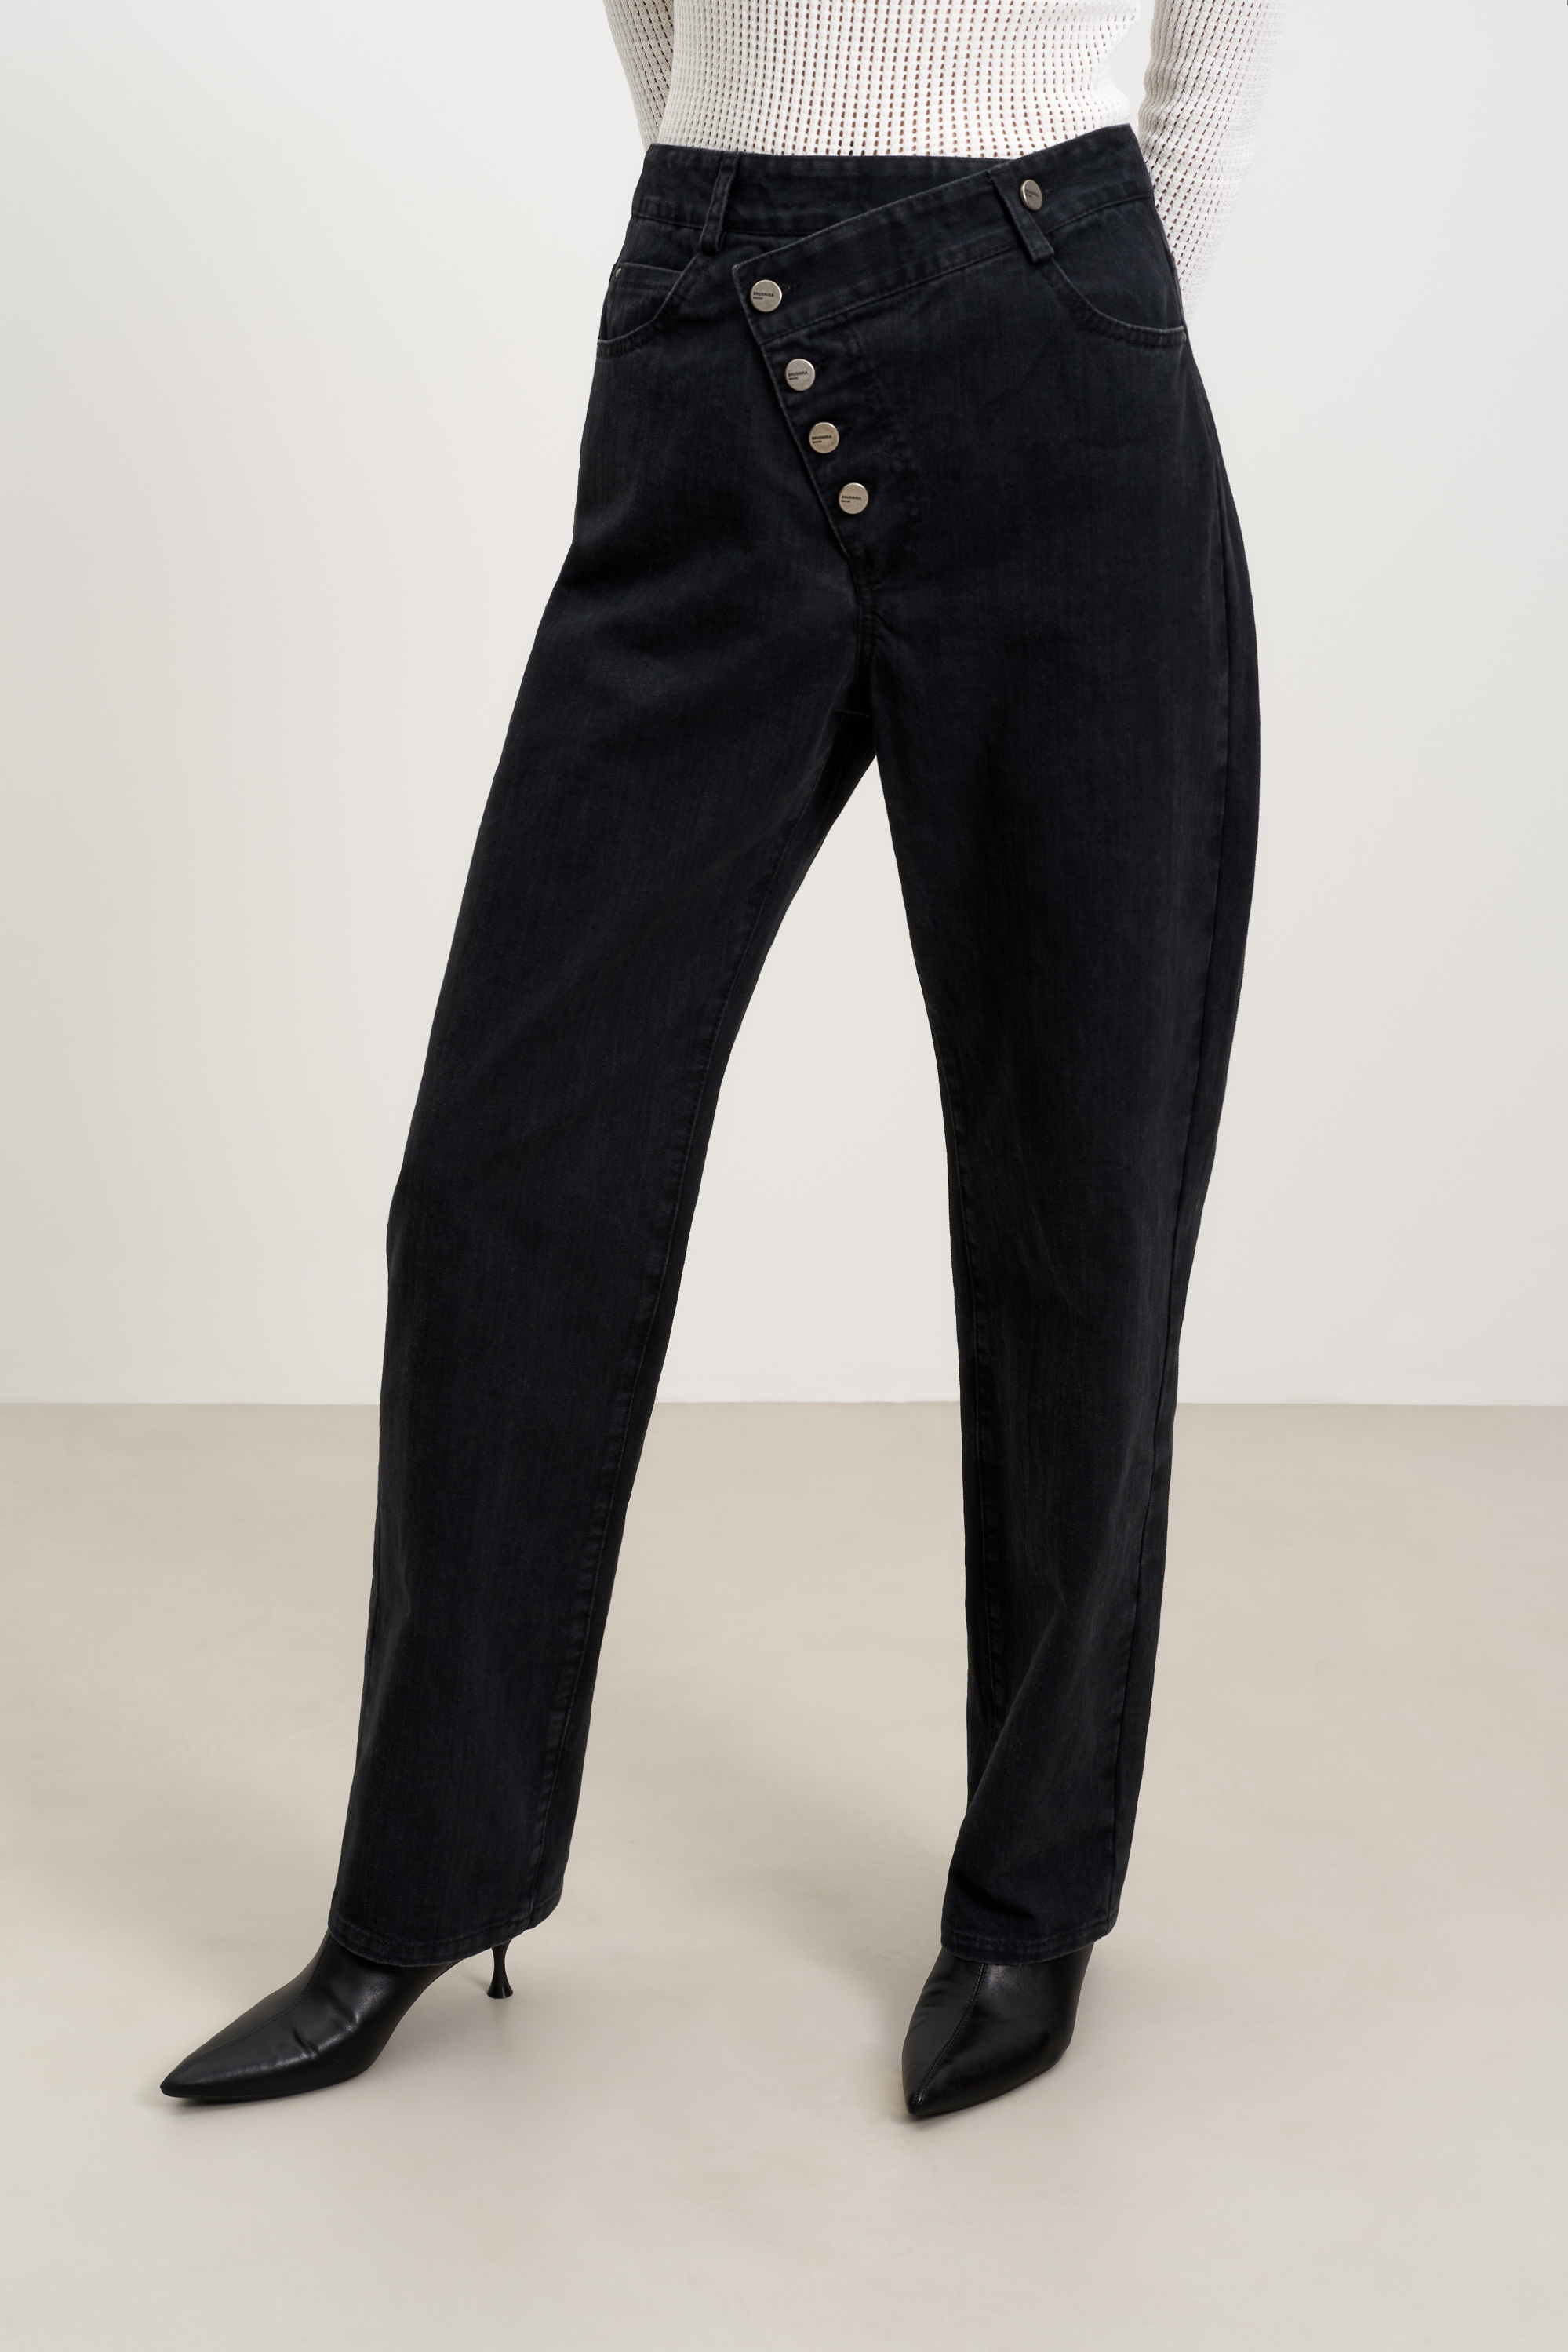 Trousers 3348-01 Black from BRUSNiKA